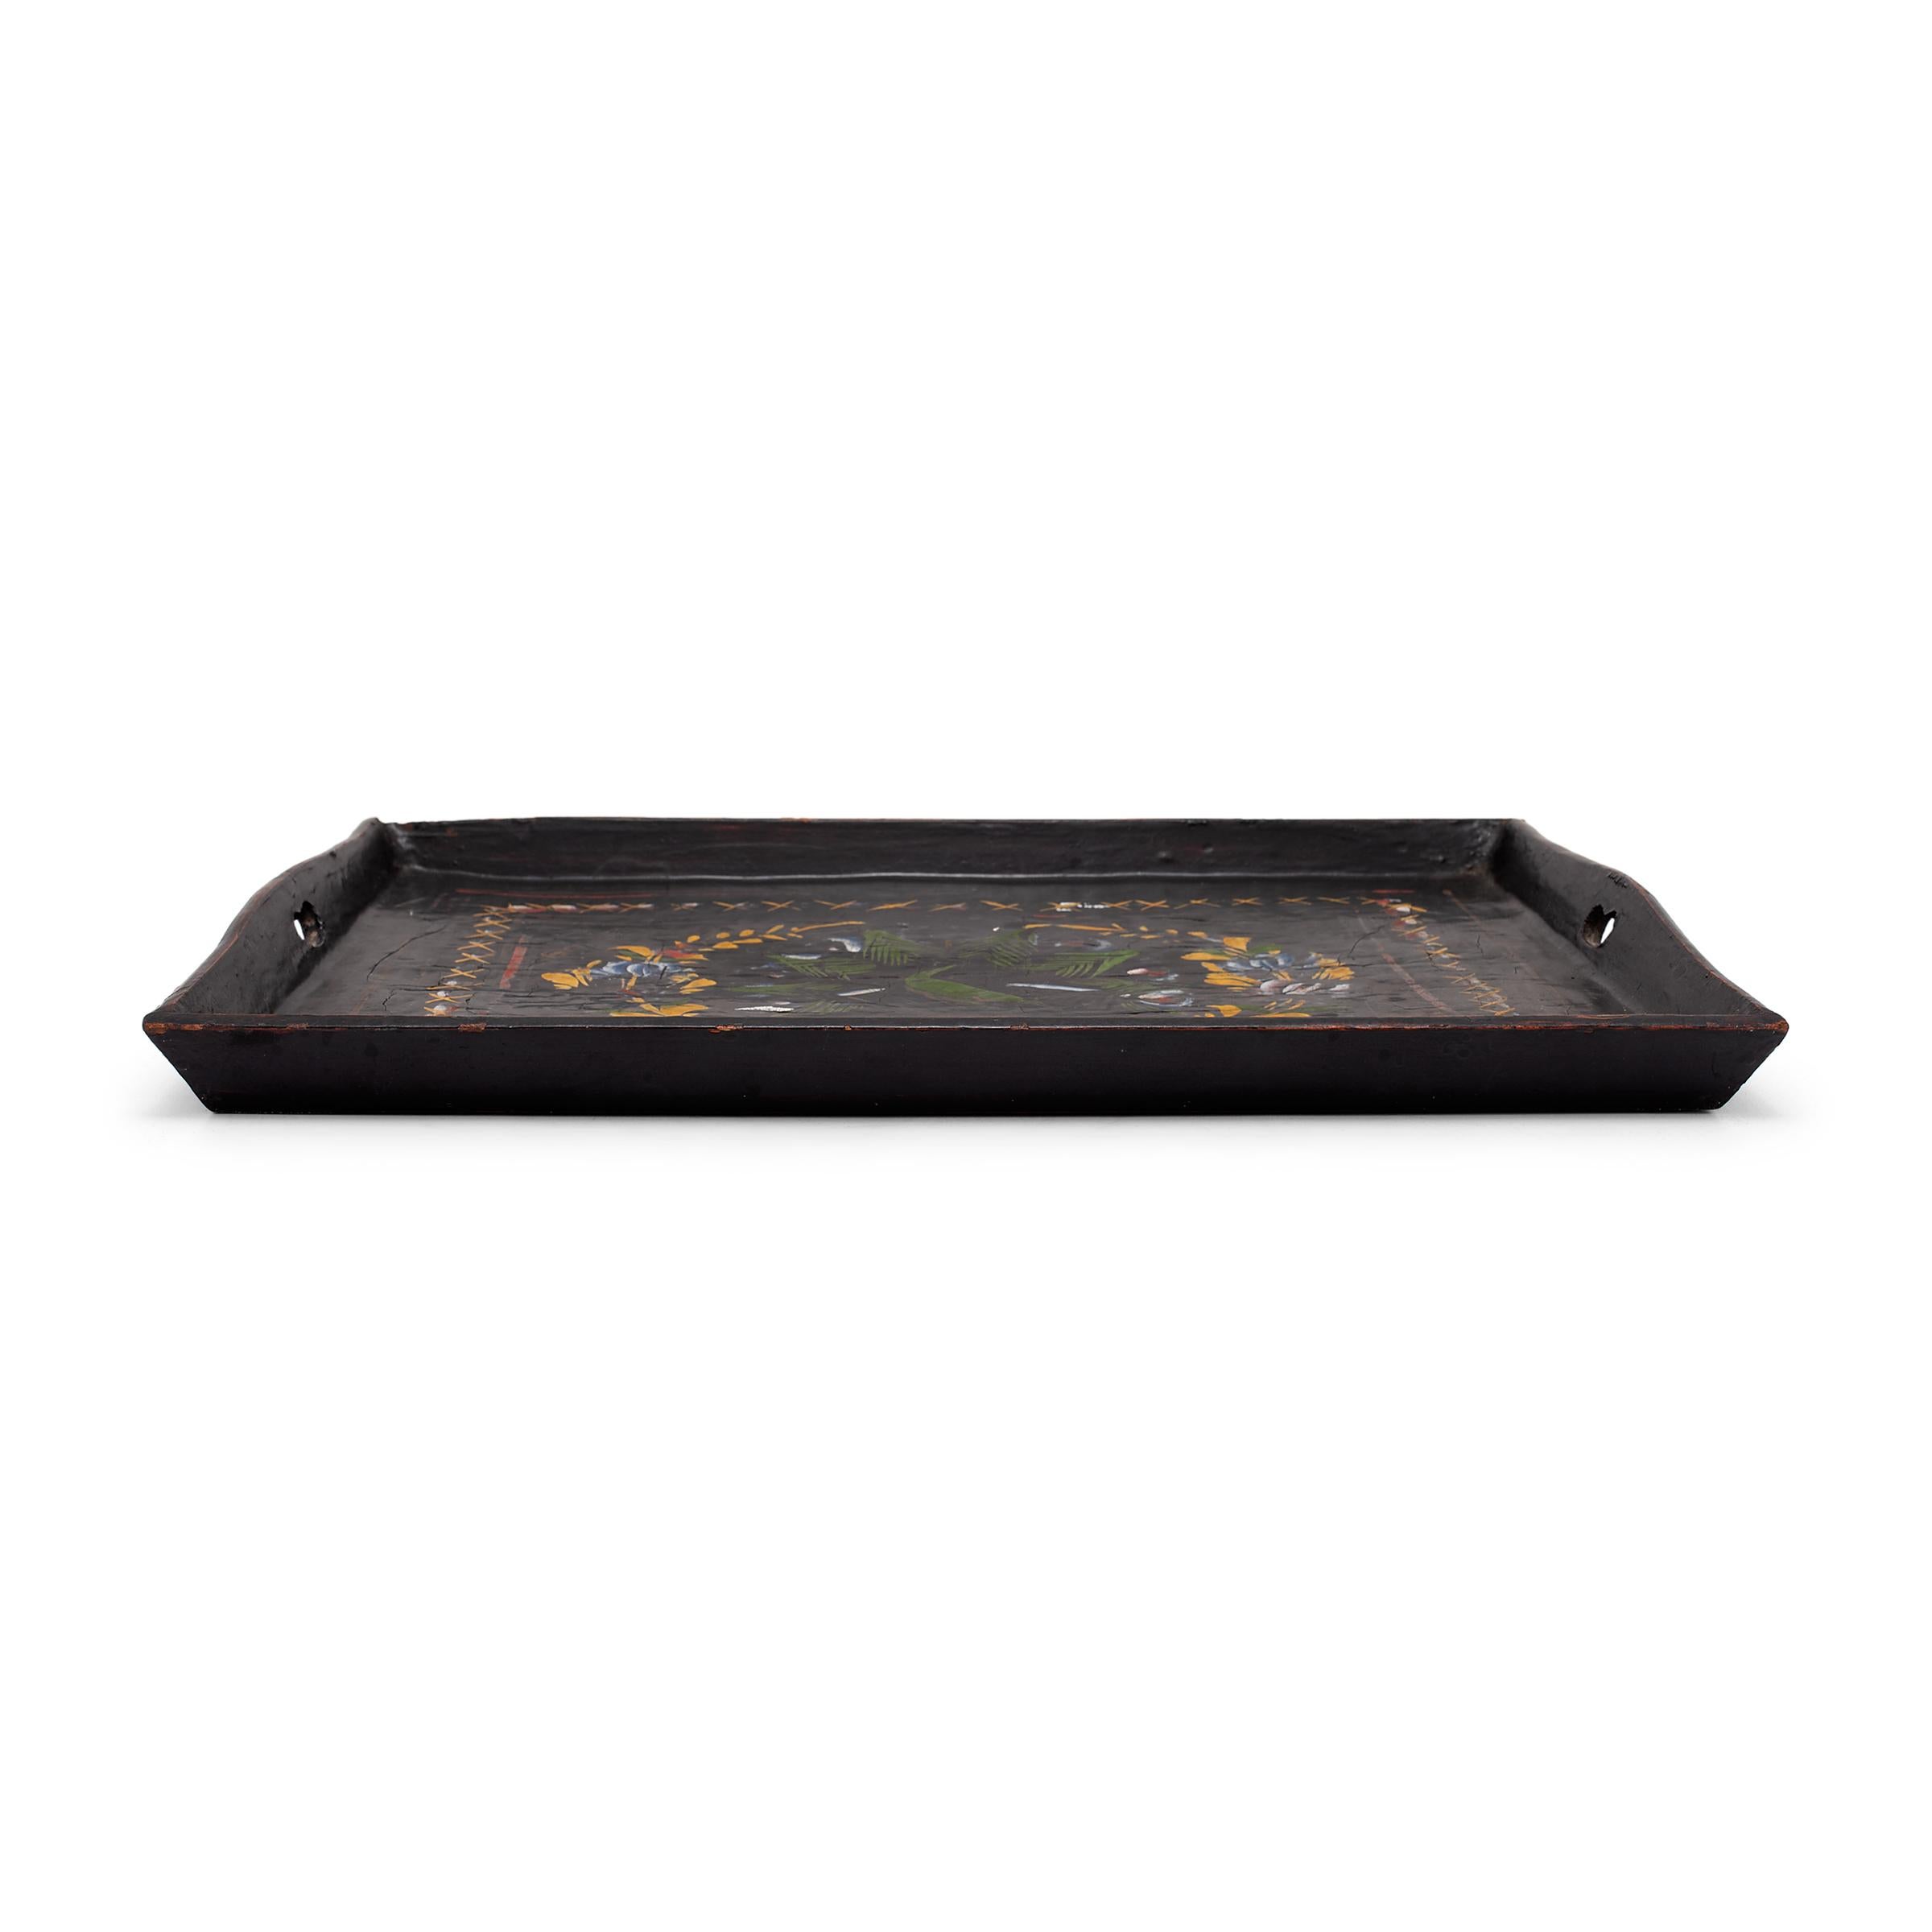 This rectangular wooden tray is finished with black lacquer and decorated with a hand-painted design of flower blossoms and peacock feathers. Painted in a palette of yellow, red, green and blue, the loosely brushed decoration adds bright color and